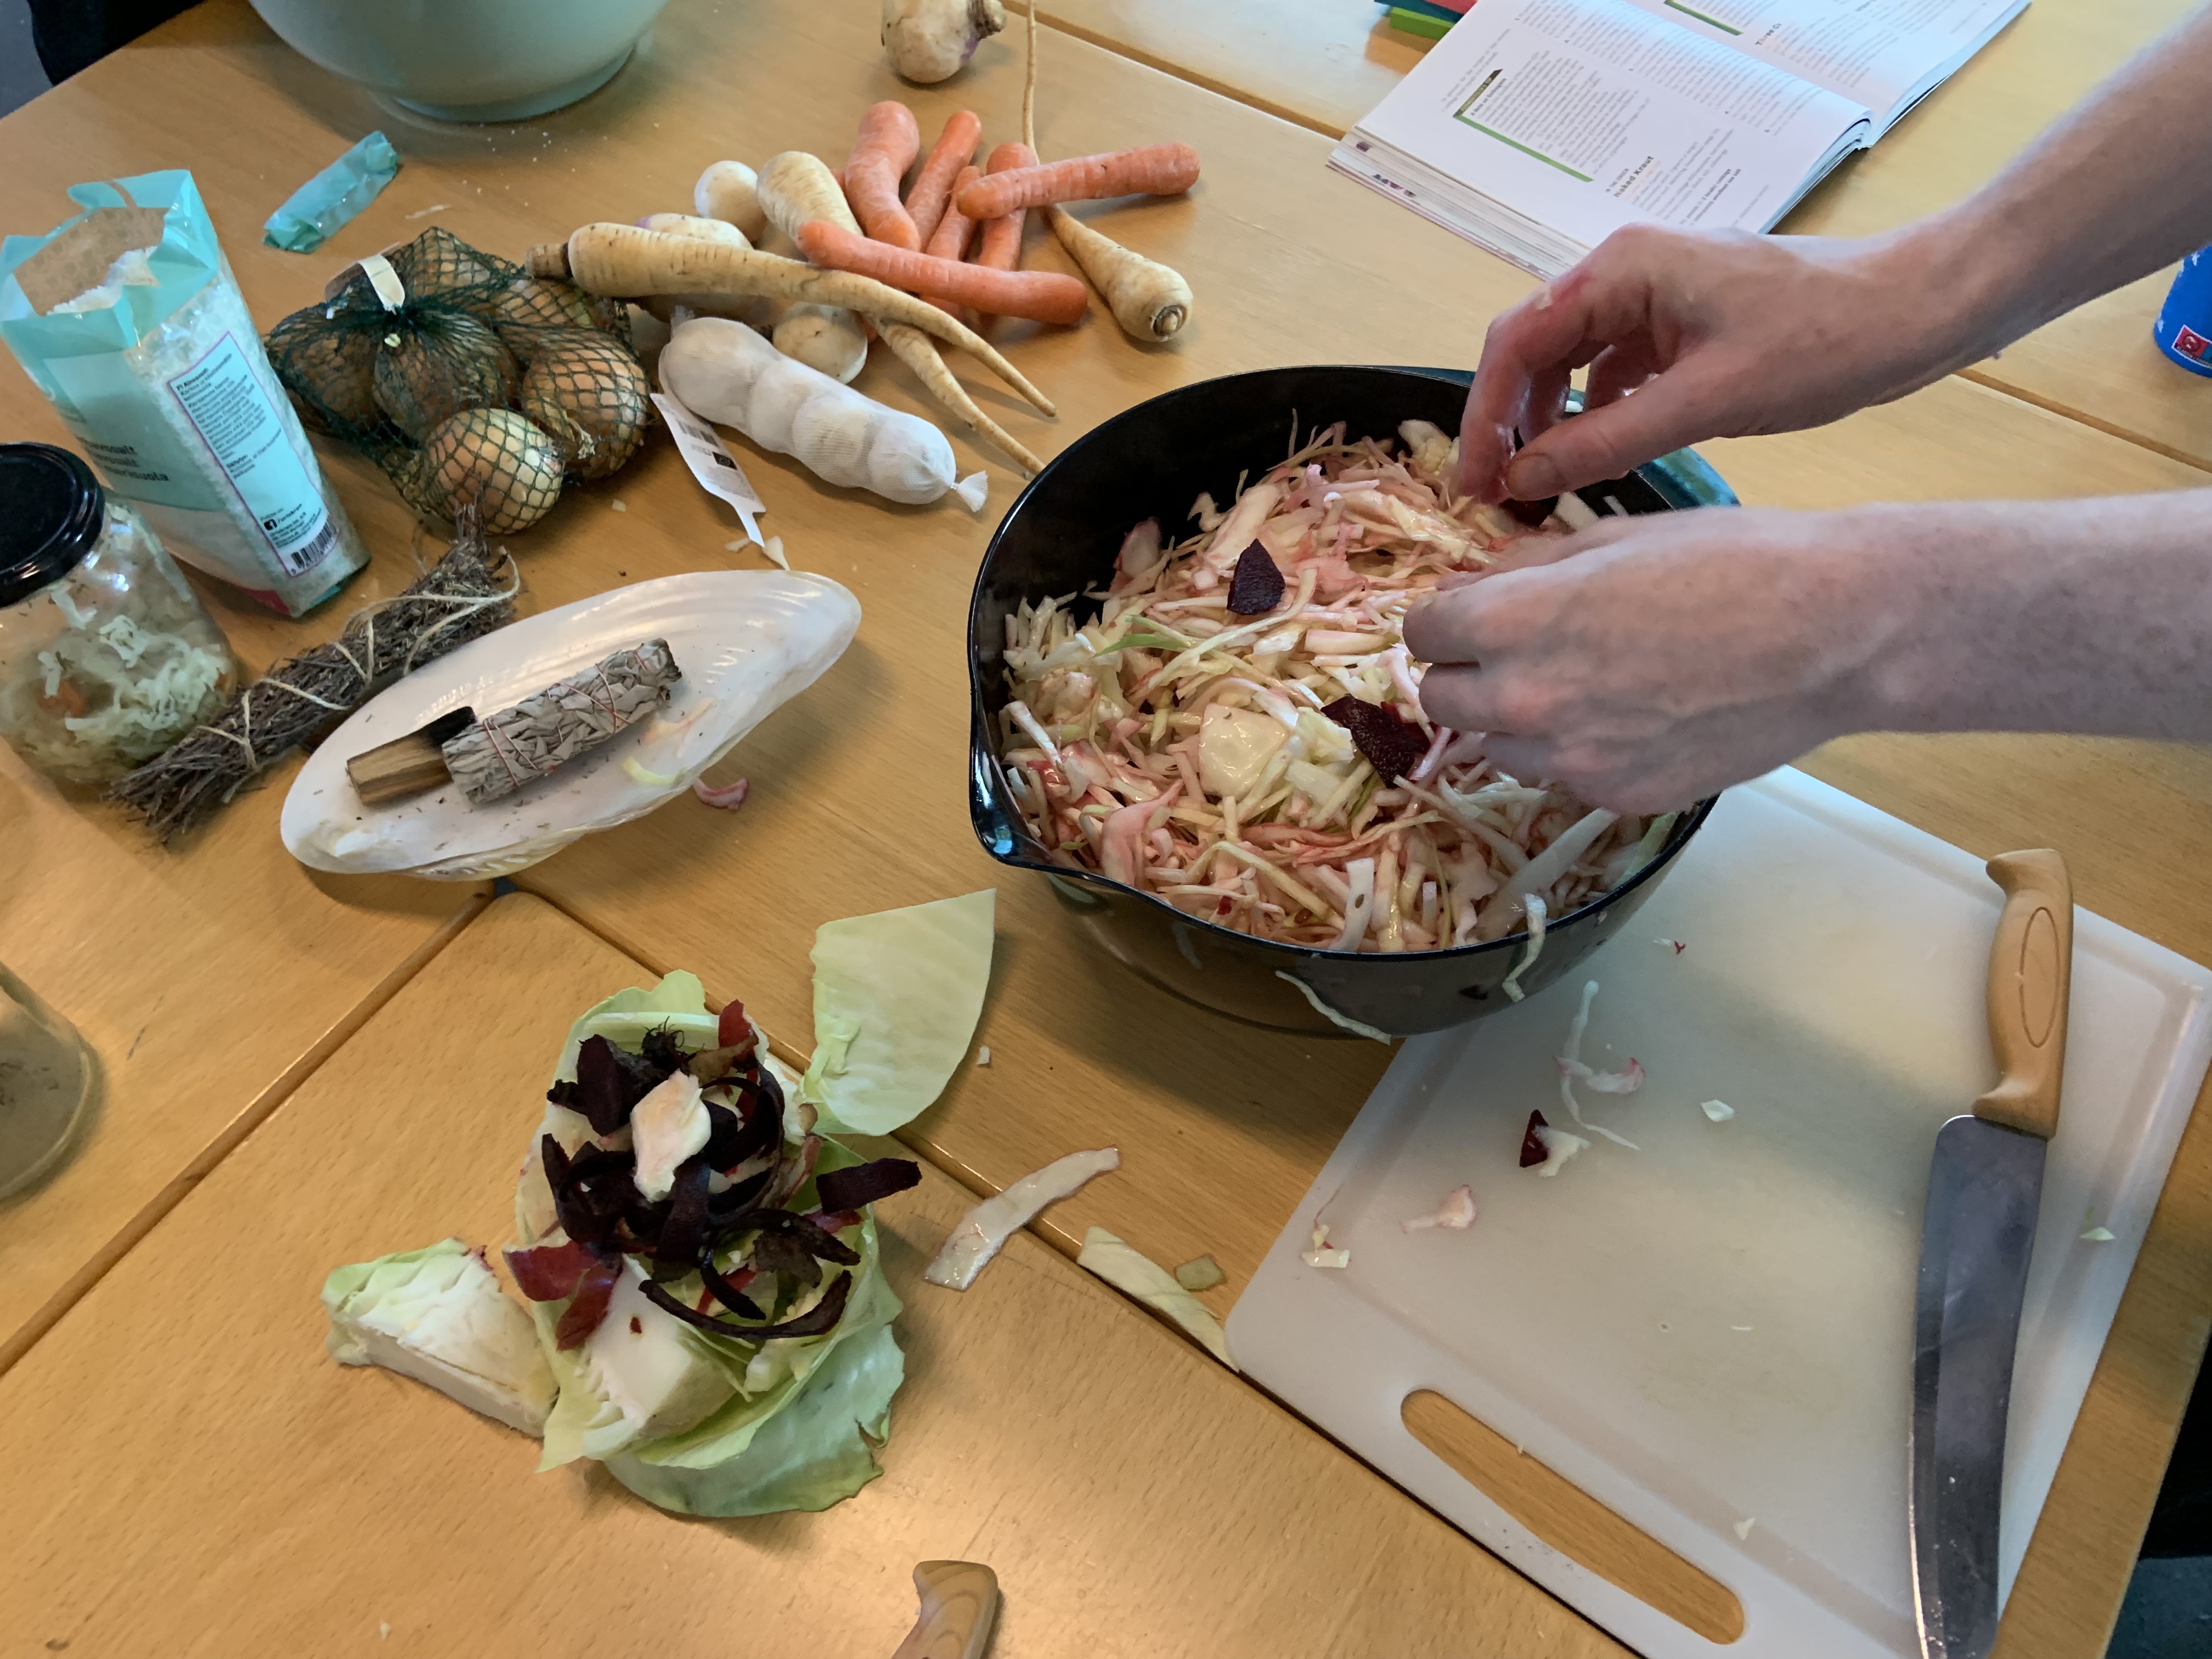 A bowl of shredded cabbage that has been massaged with salt, standing on a table with ingredients for fermenting such as carrots, parsnips, herbs, garlic, onions and salt. Off to the left the chopping board and knife are visible.